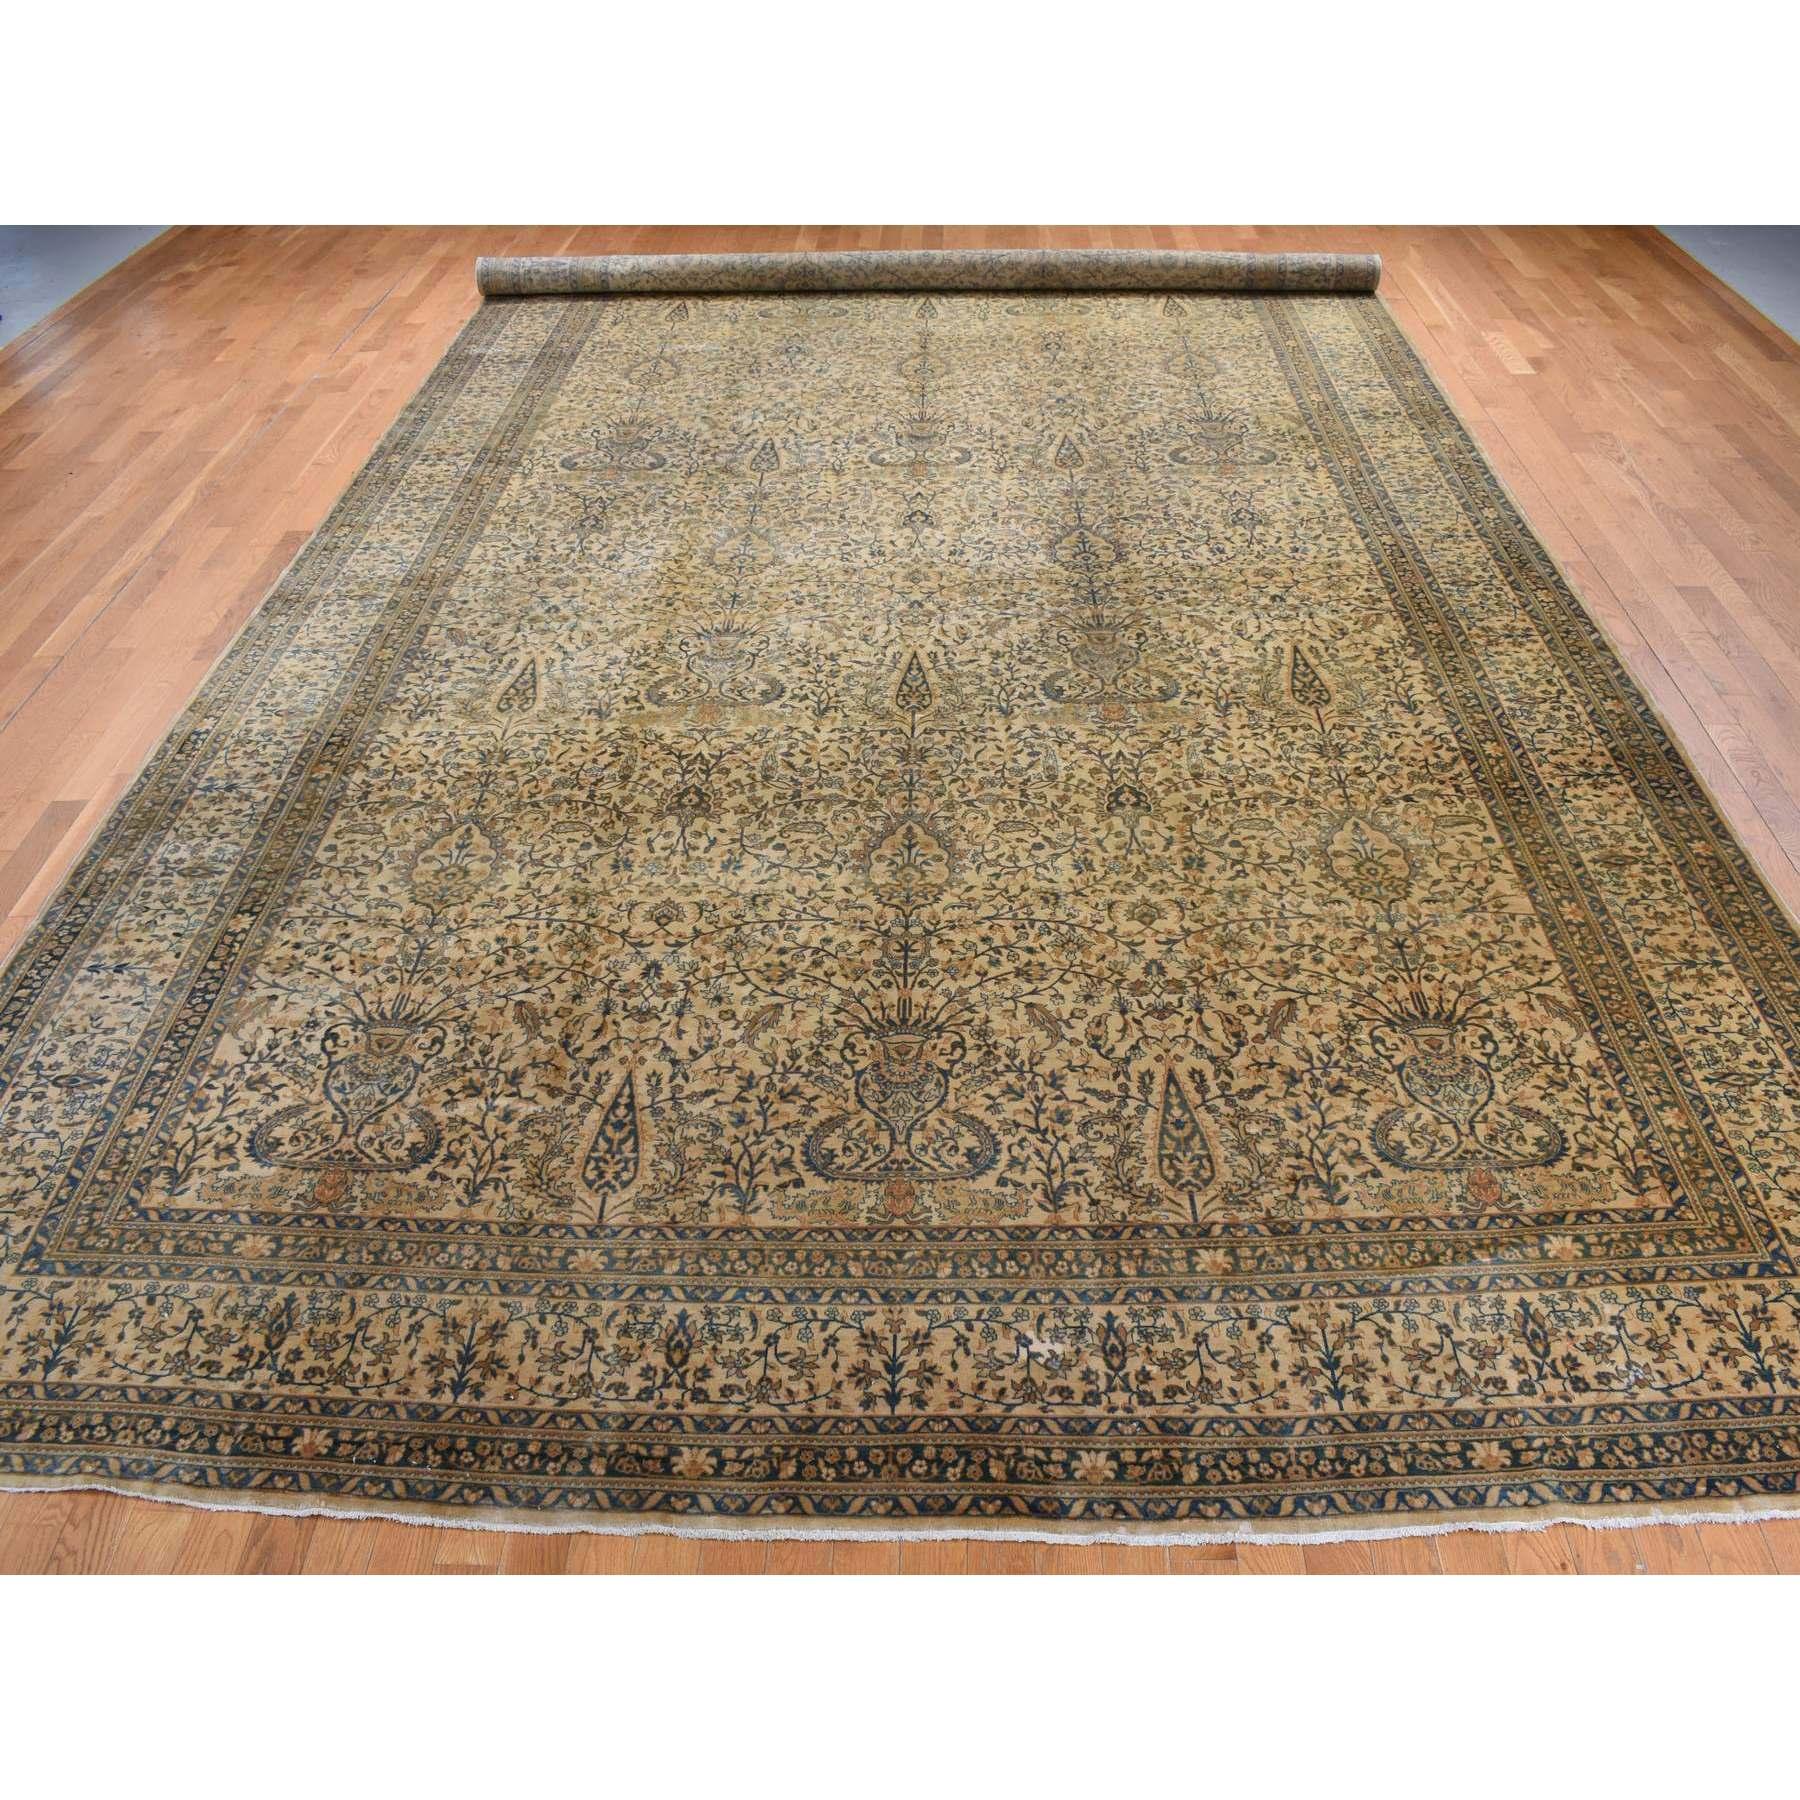 This fabulous Hand-Knotted carpet has been created and designed for extra strength and durability. This rug has been handcrafted for weeks in the traditional method that is used to make
Exact Rug Size in Feet and Inches : 10'8